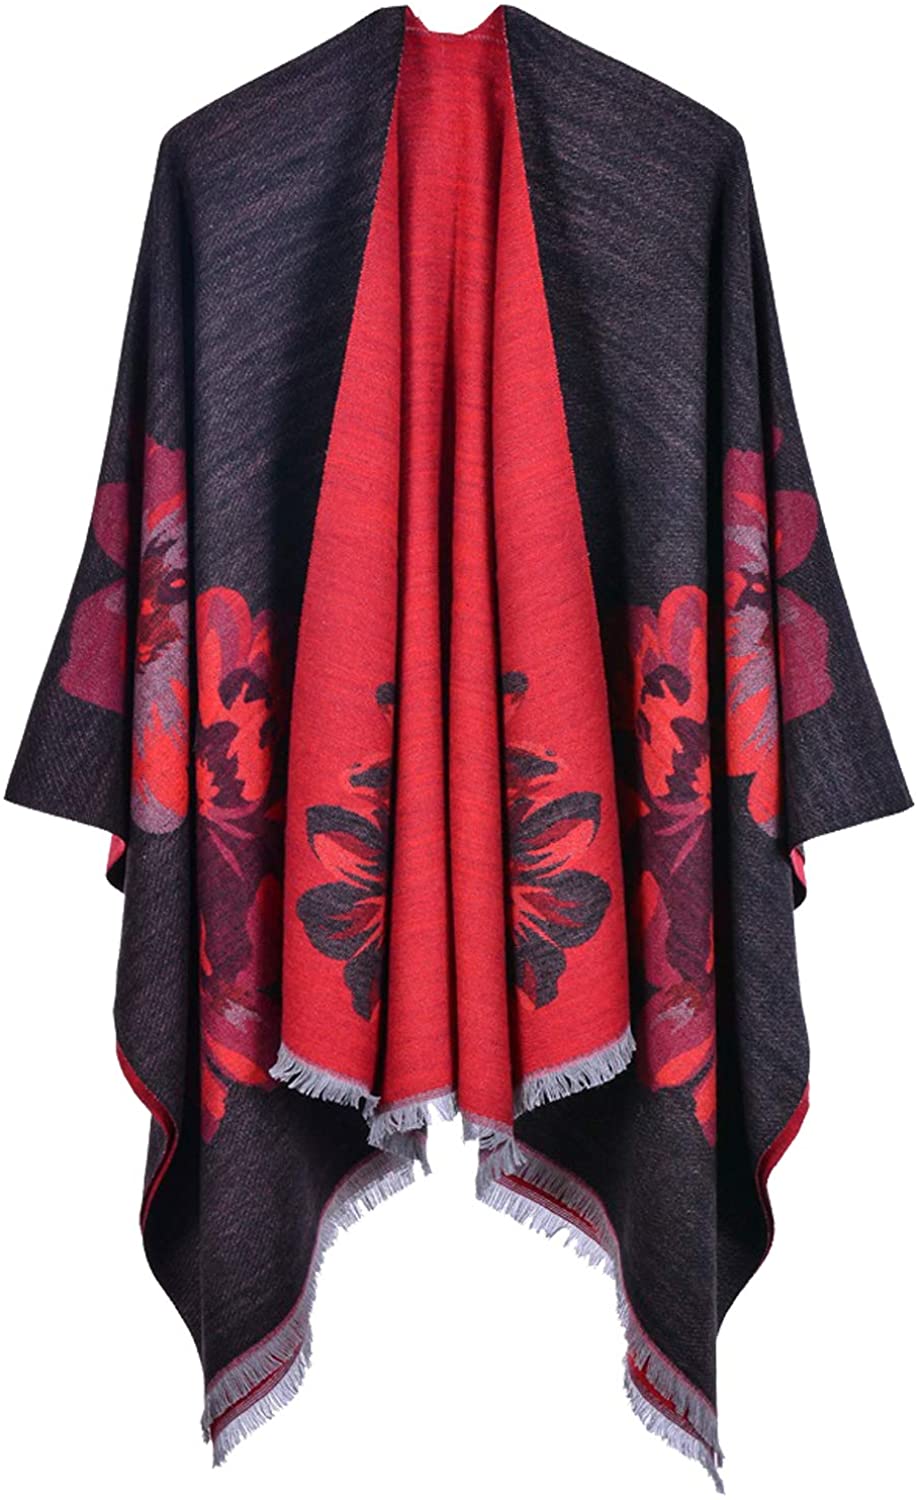 Yutdeng Women's Shawl Wrap Scarfs Poncho Cardigan Sweater Open Front for Fall Winter Plaid Sweater Poncho Cape Blanket Shawls and Wraps